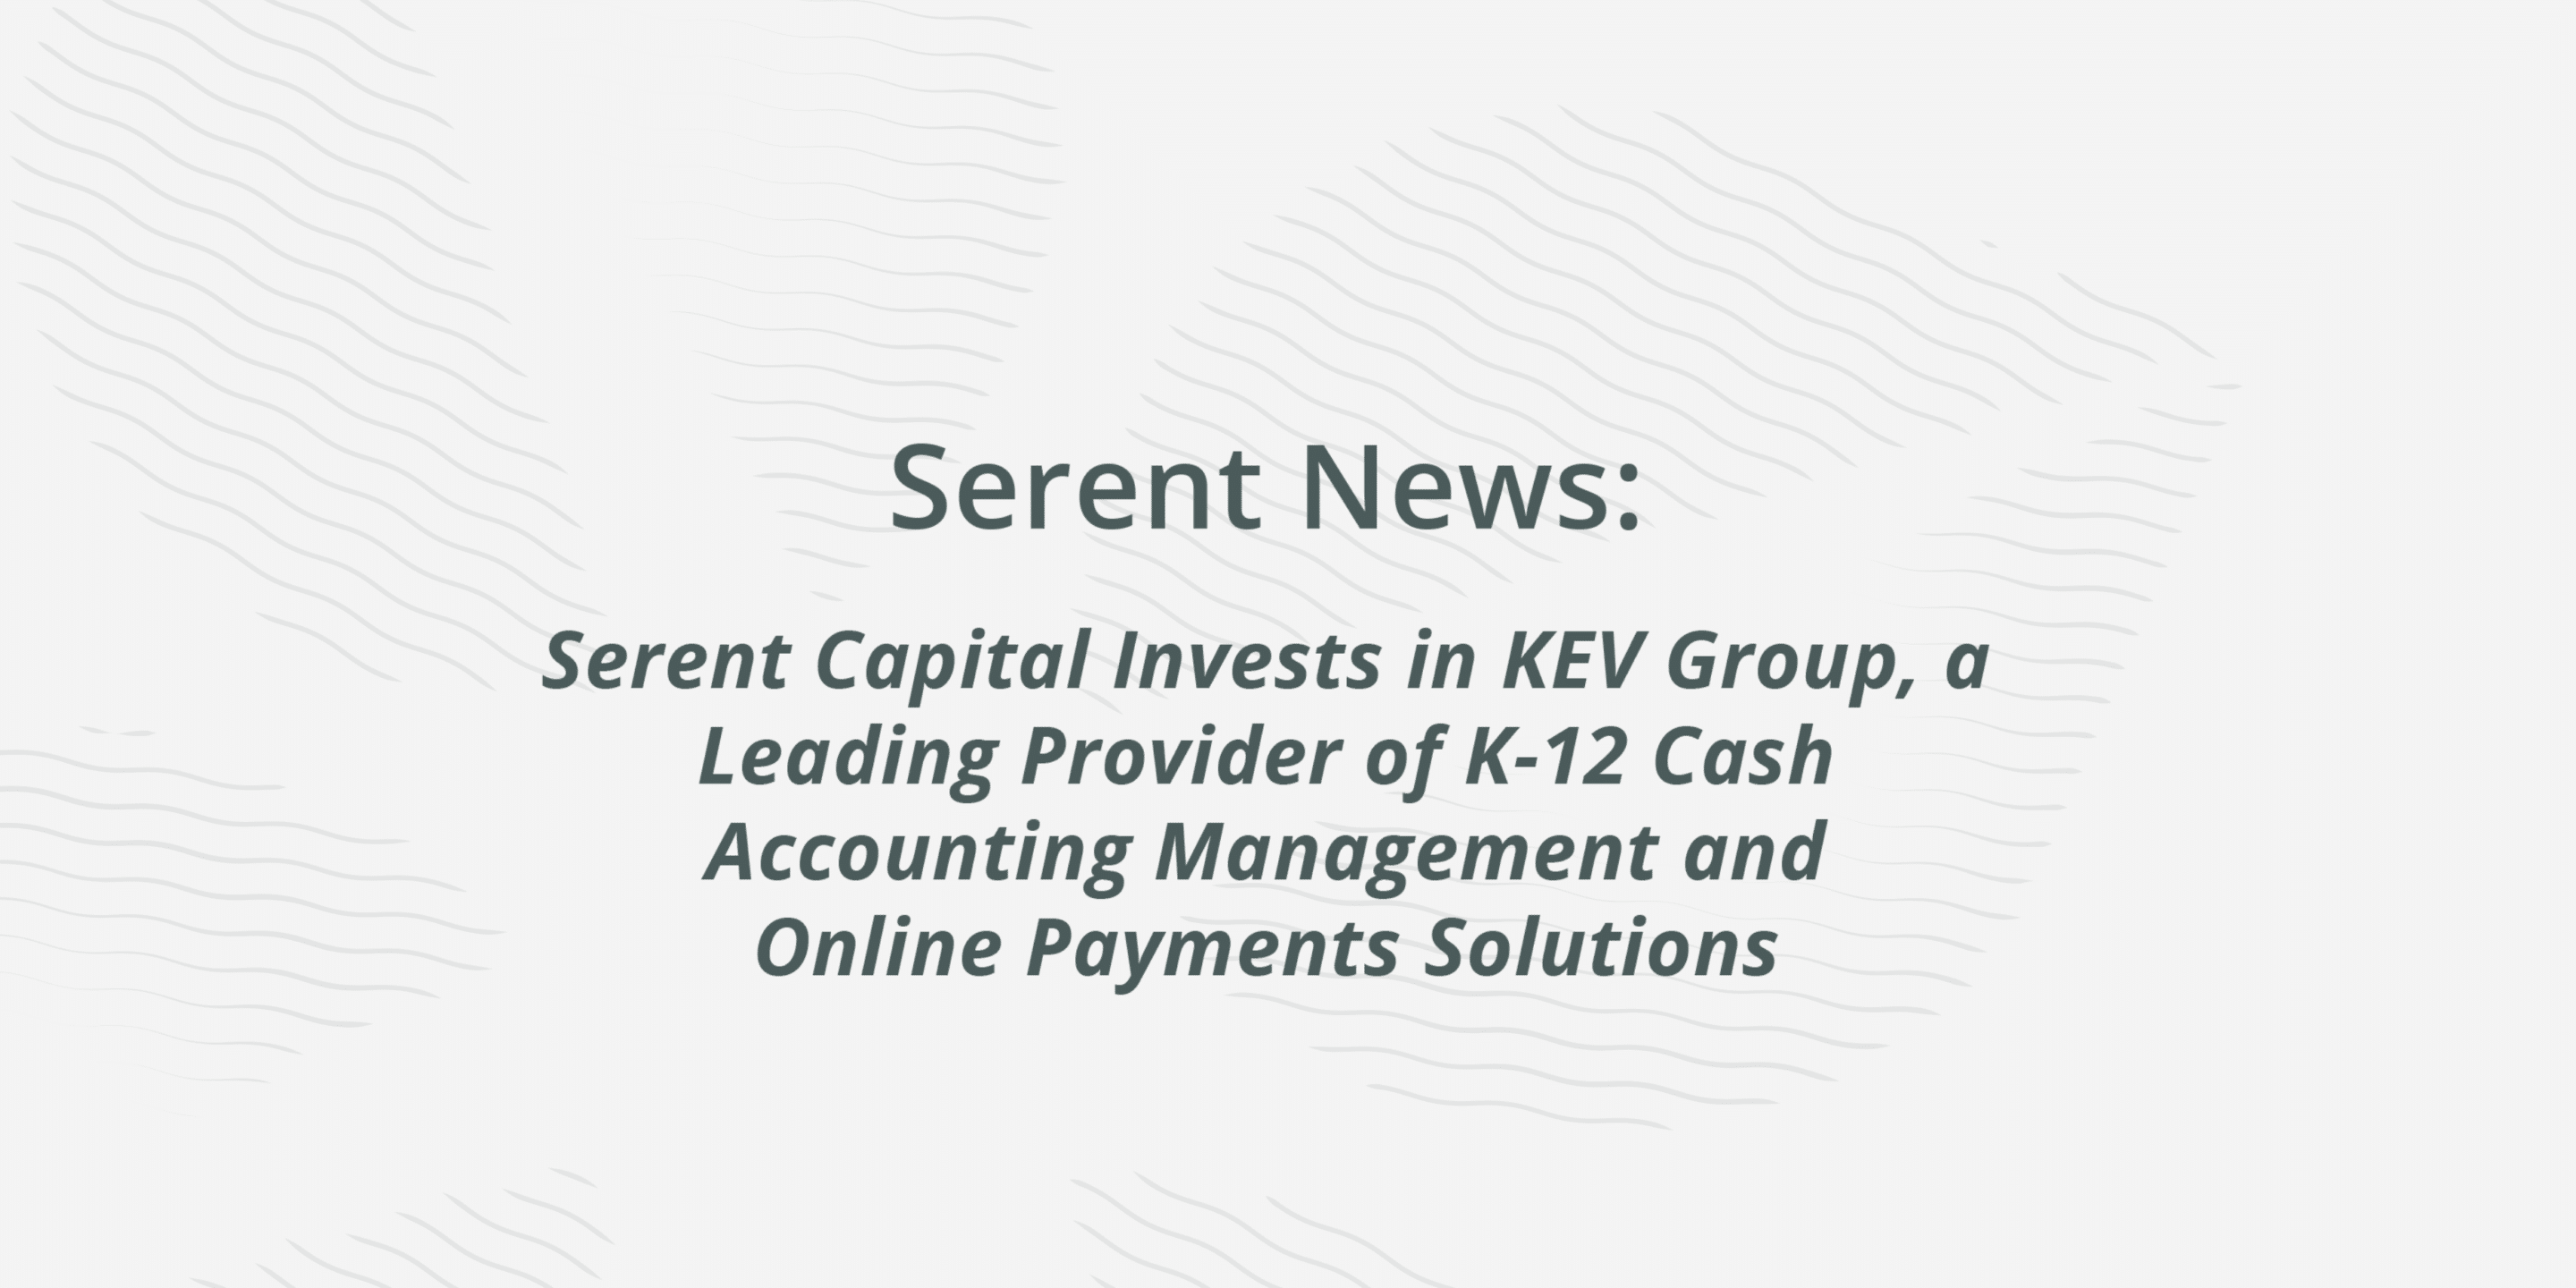 Serent Capital Invests in KEV Group, a Leading Provider of K-12 Cash Accounting Management and Online Payments Solutions